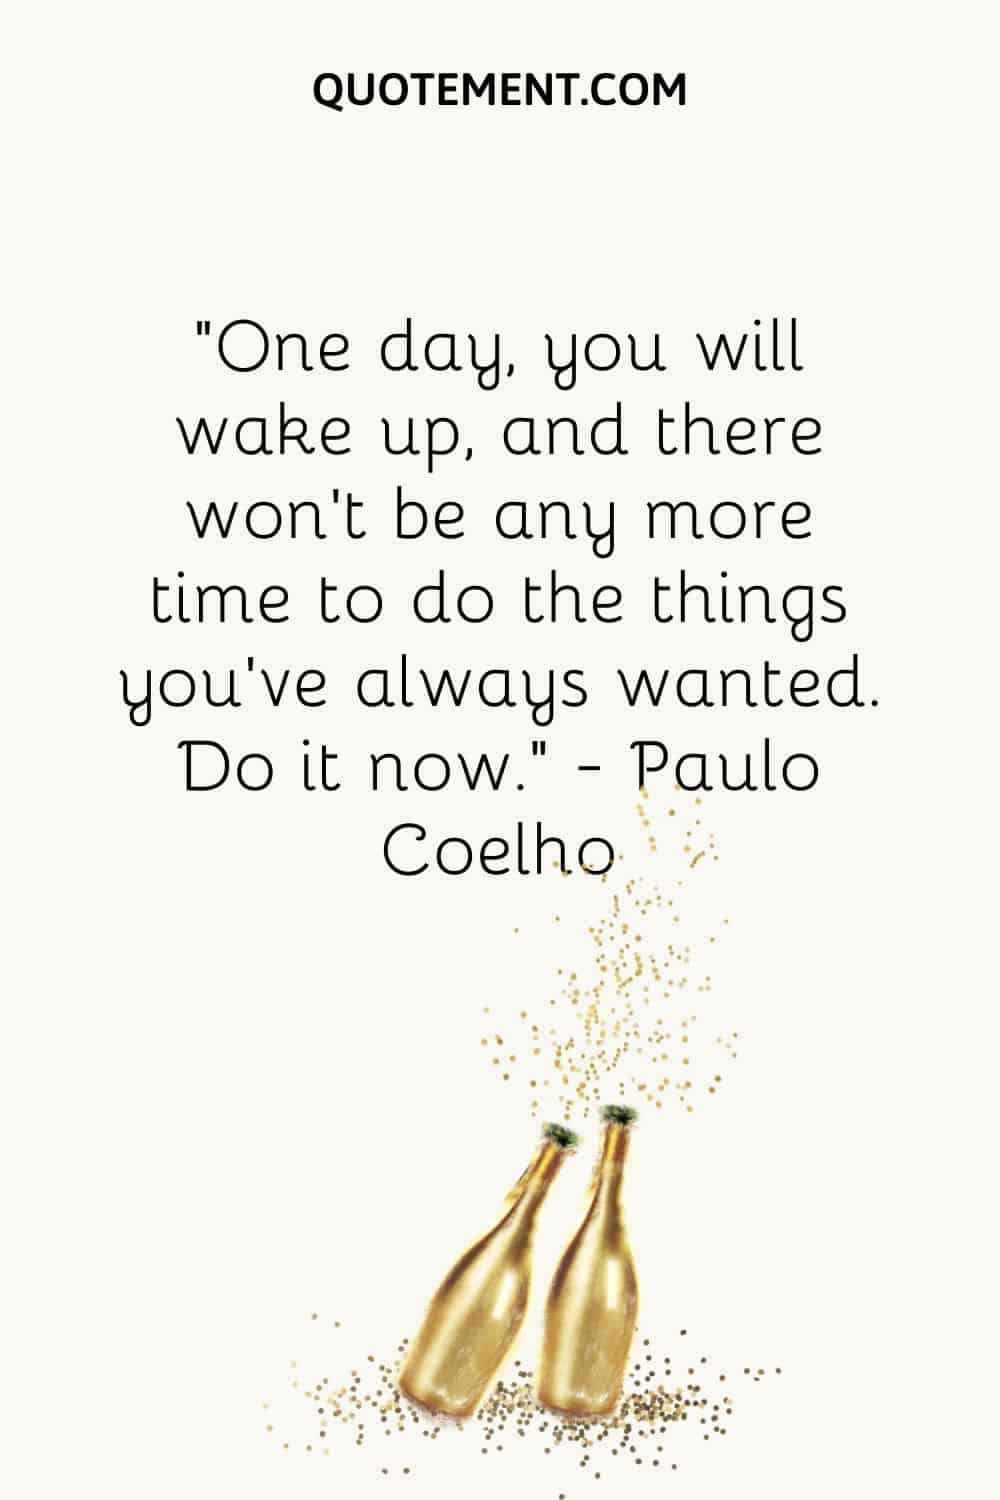 “One day, you will wake up, and there won’t be any more time to do the things you’ve always wanted. Do it now.” ― Paolo Coelho